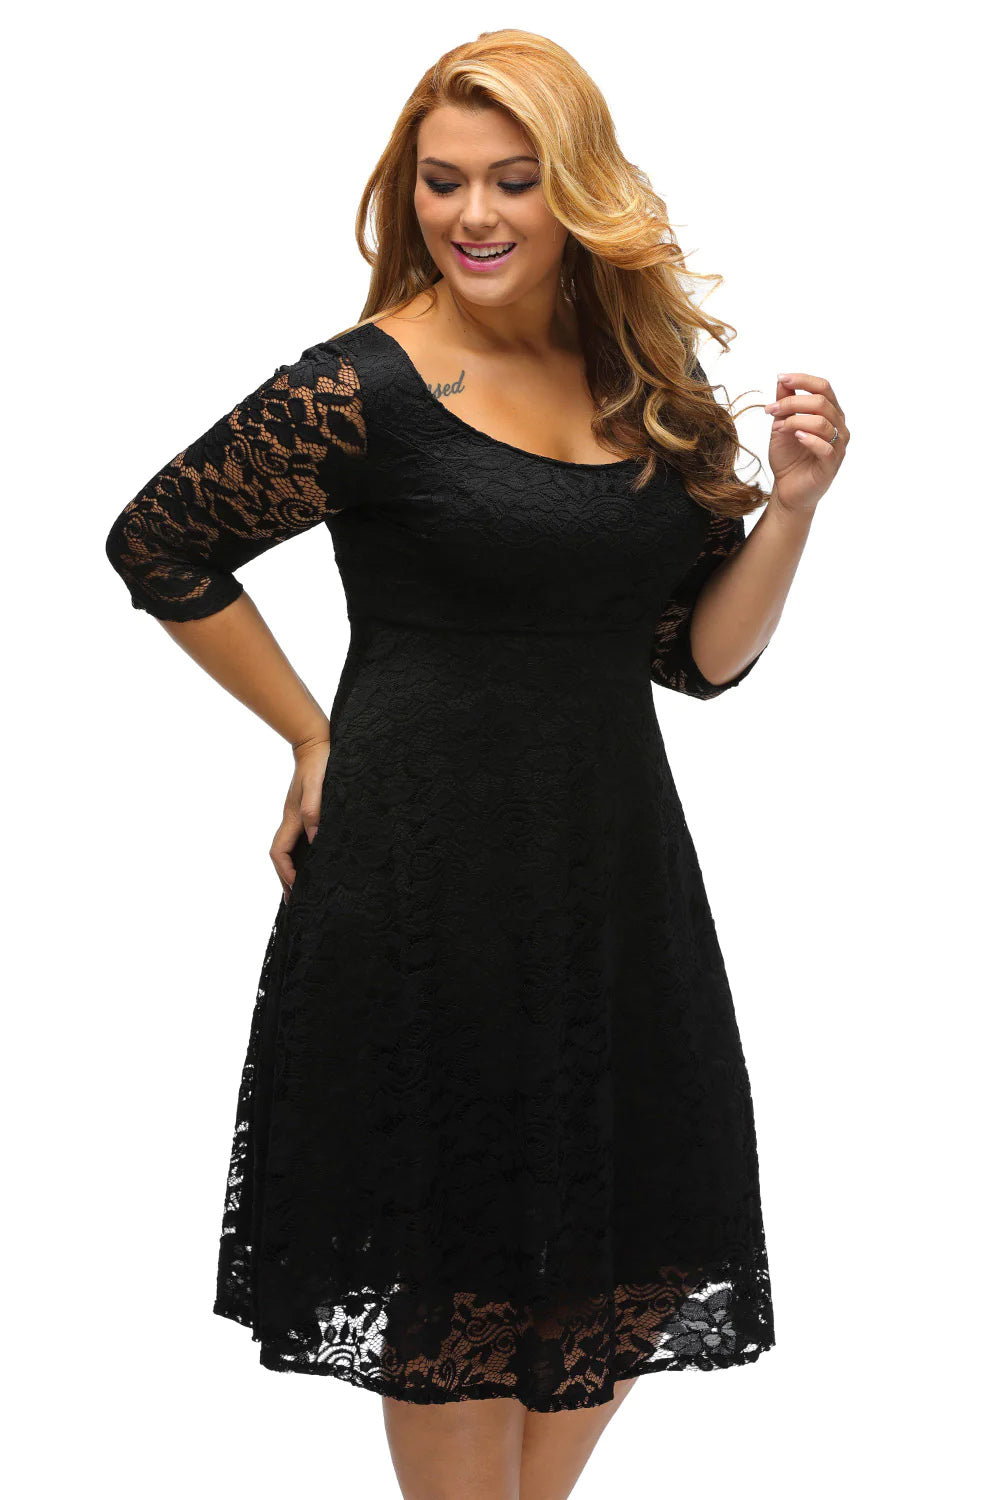 Rina Black Floral Lace Sleeved Fit and Flare Curvy Dress - The Bohemian Closet